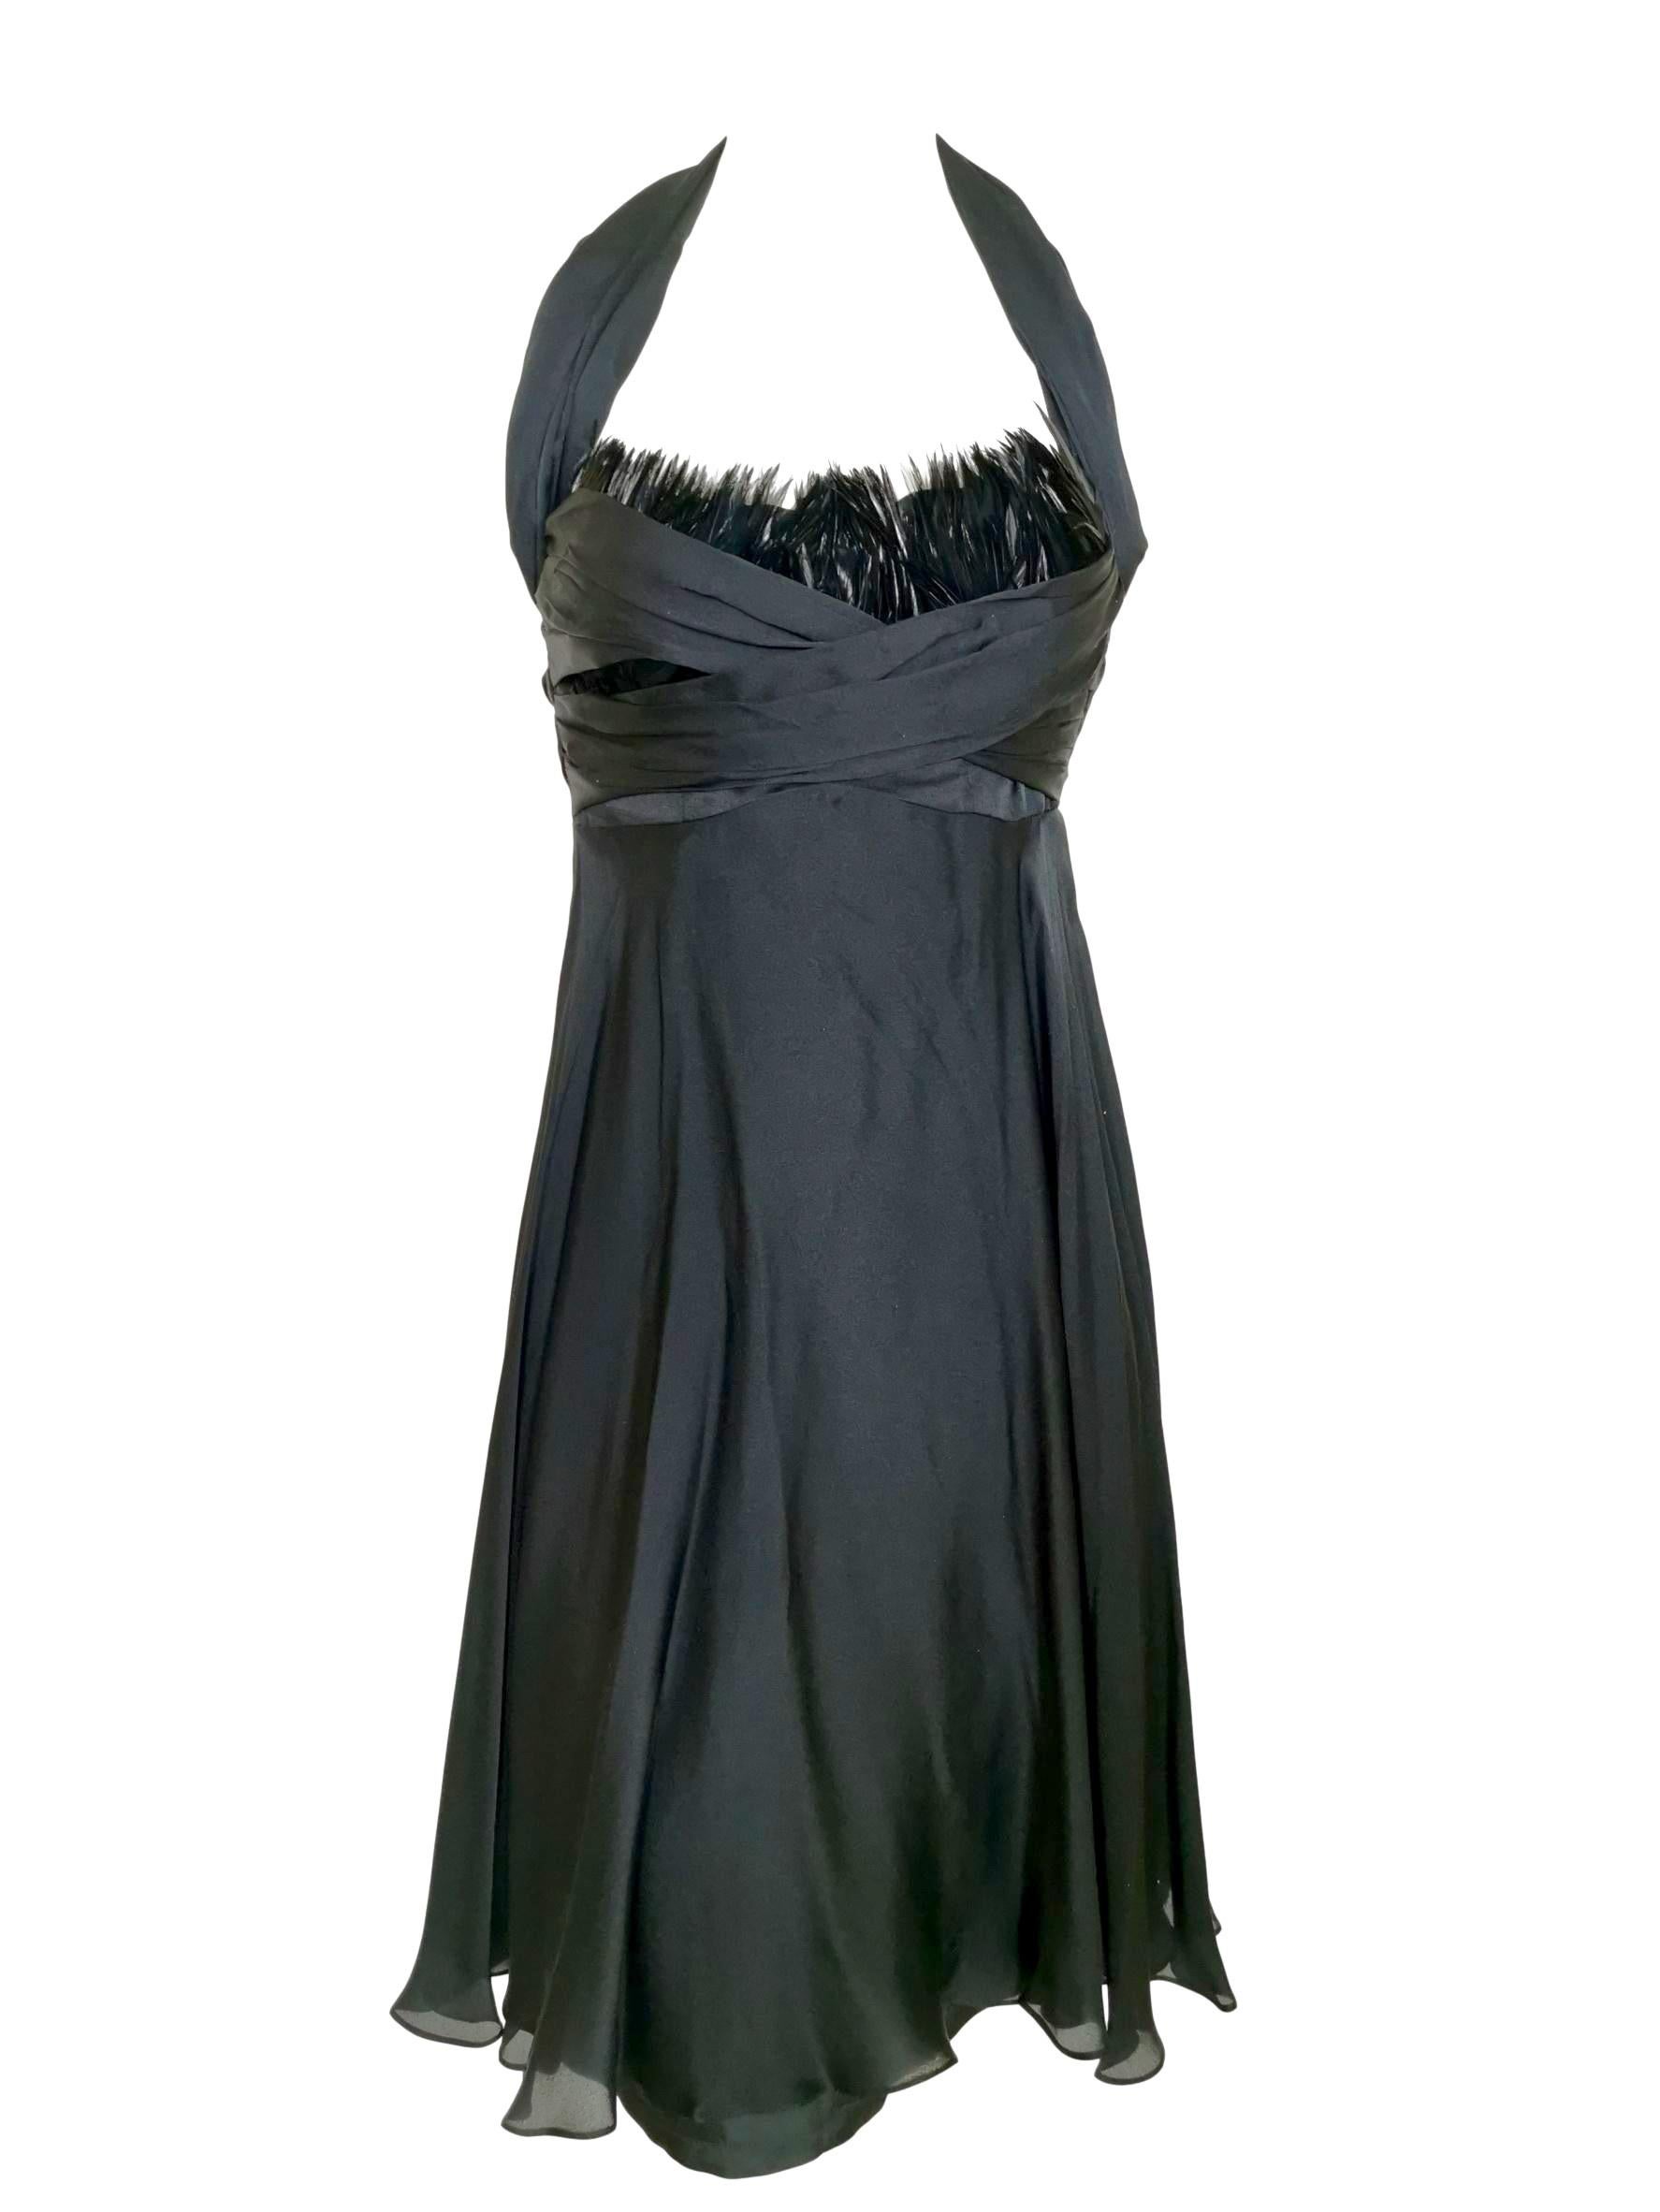 Sophie Sitbon Black Silk and Feather Dress For Sale 4